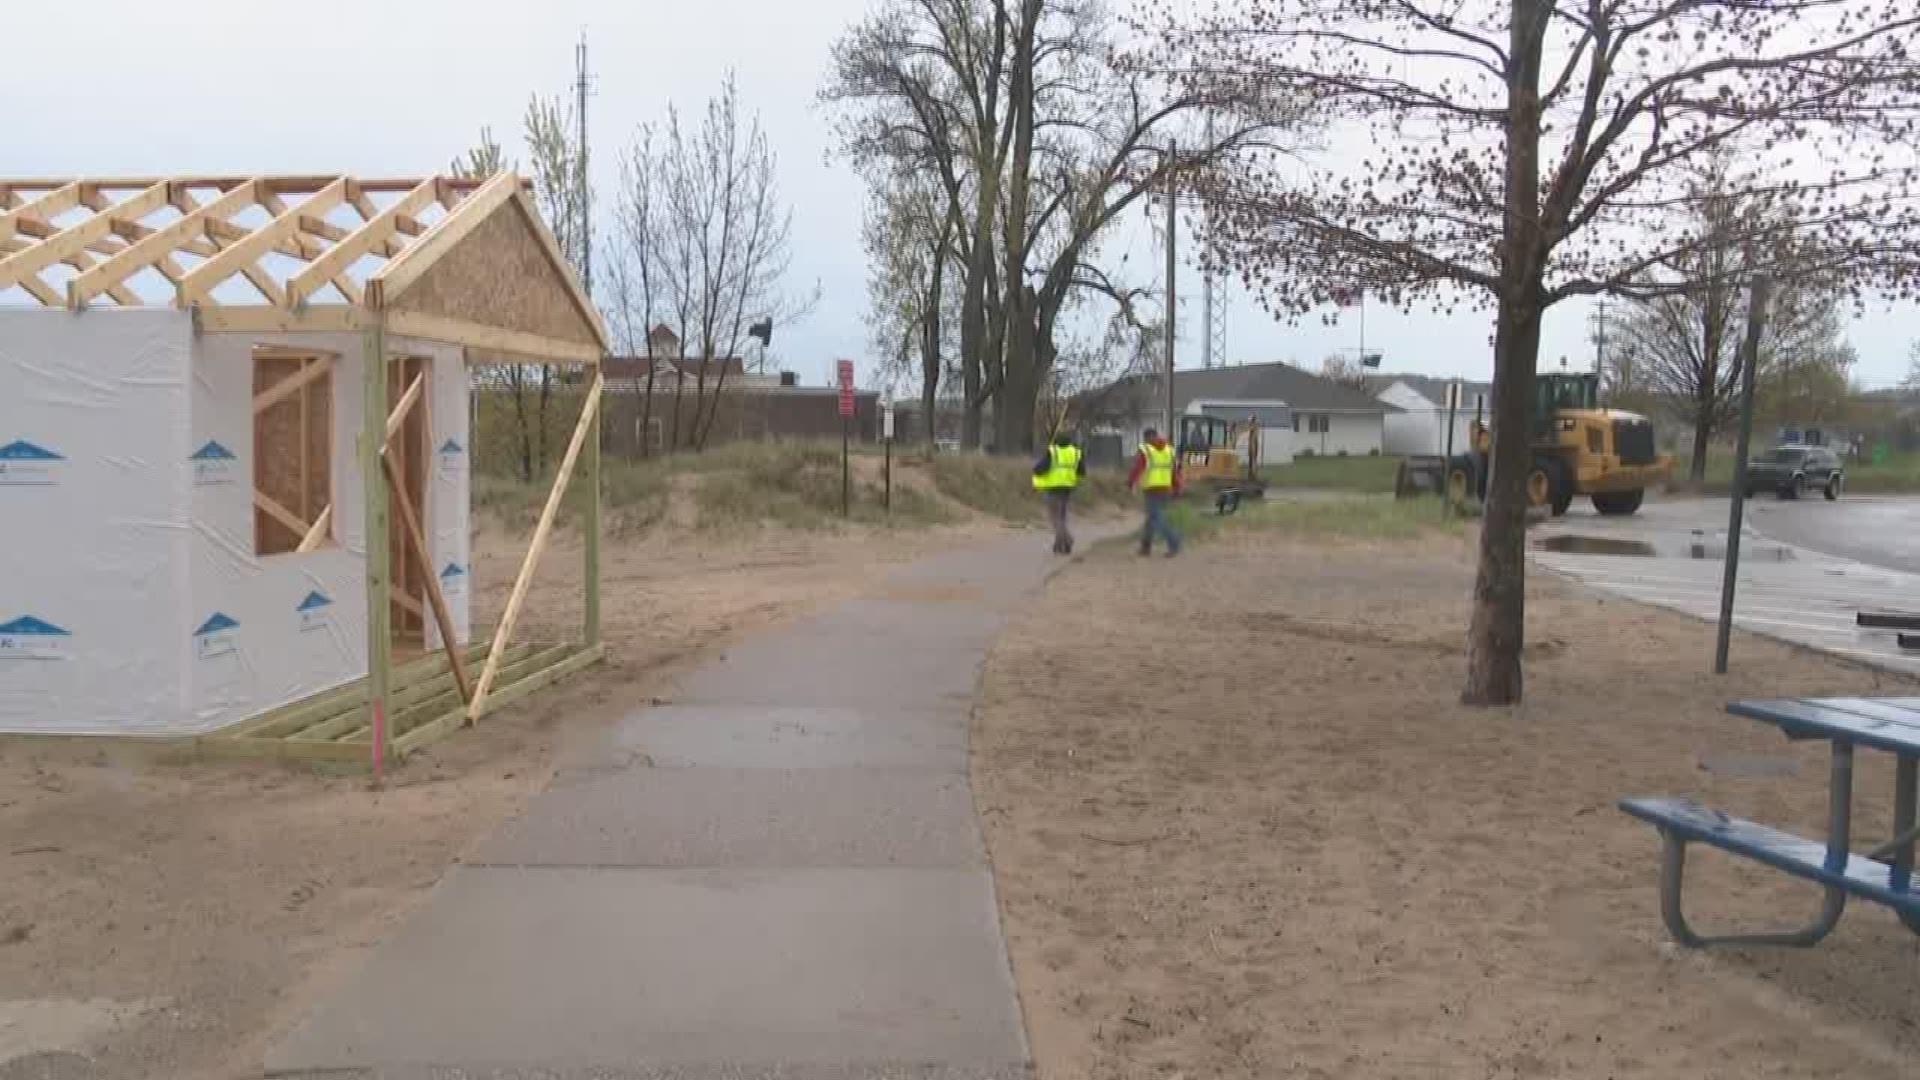 The city decided the beach location is not the best place for the structure because it can block views to Muskegon's lighthouses.